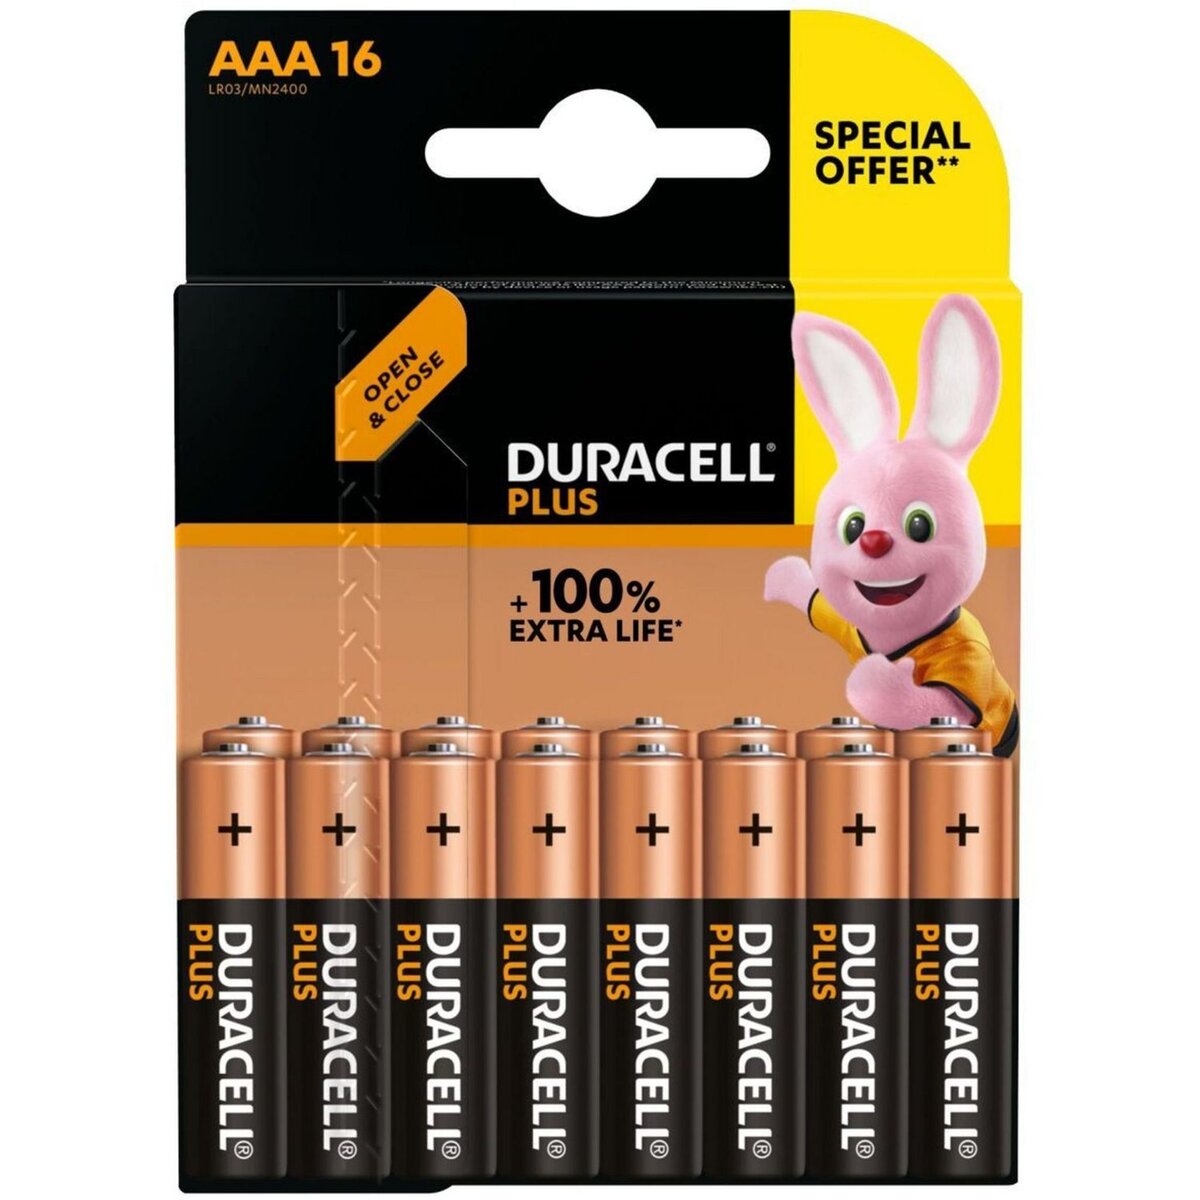 DURACELL Piles AAA 100% Offre spéciale - x16